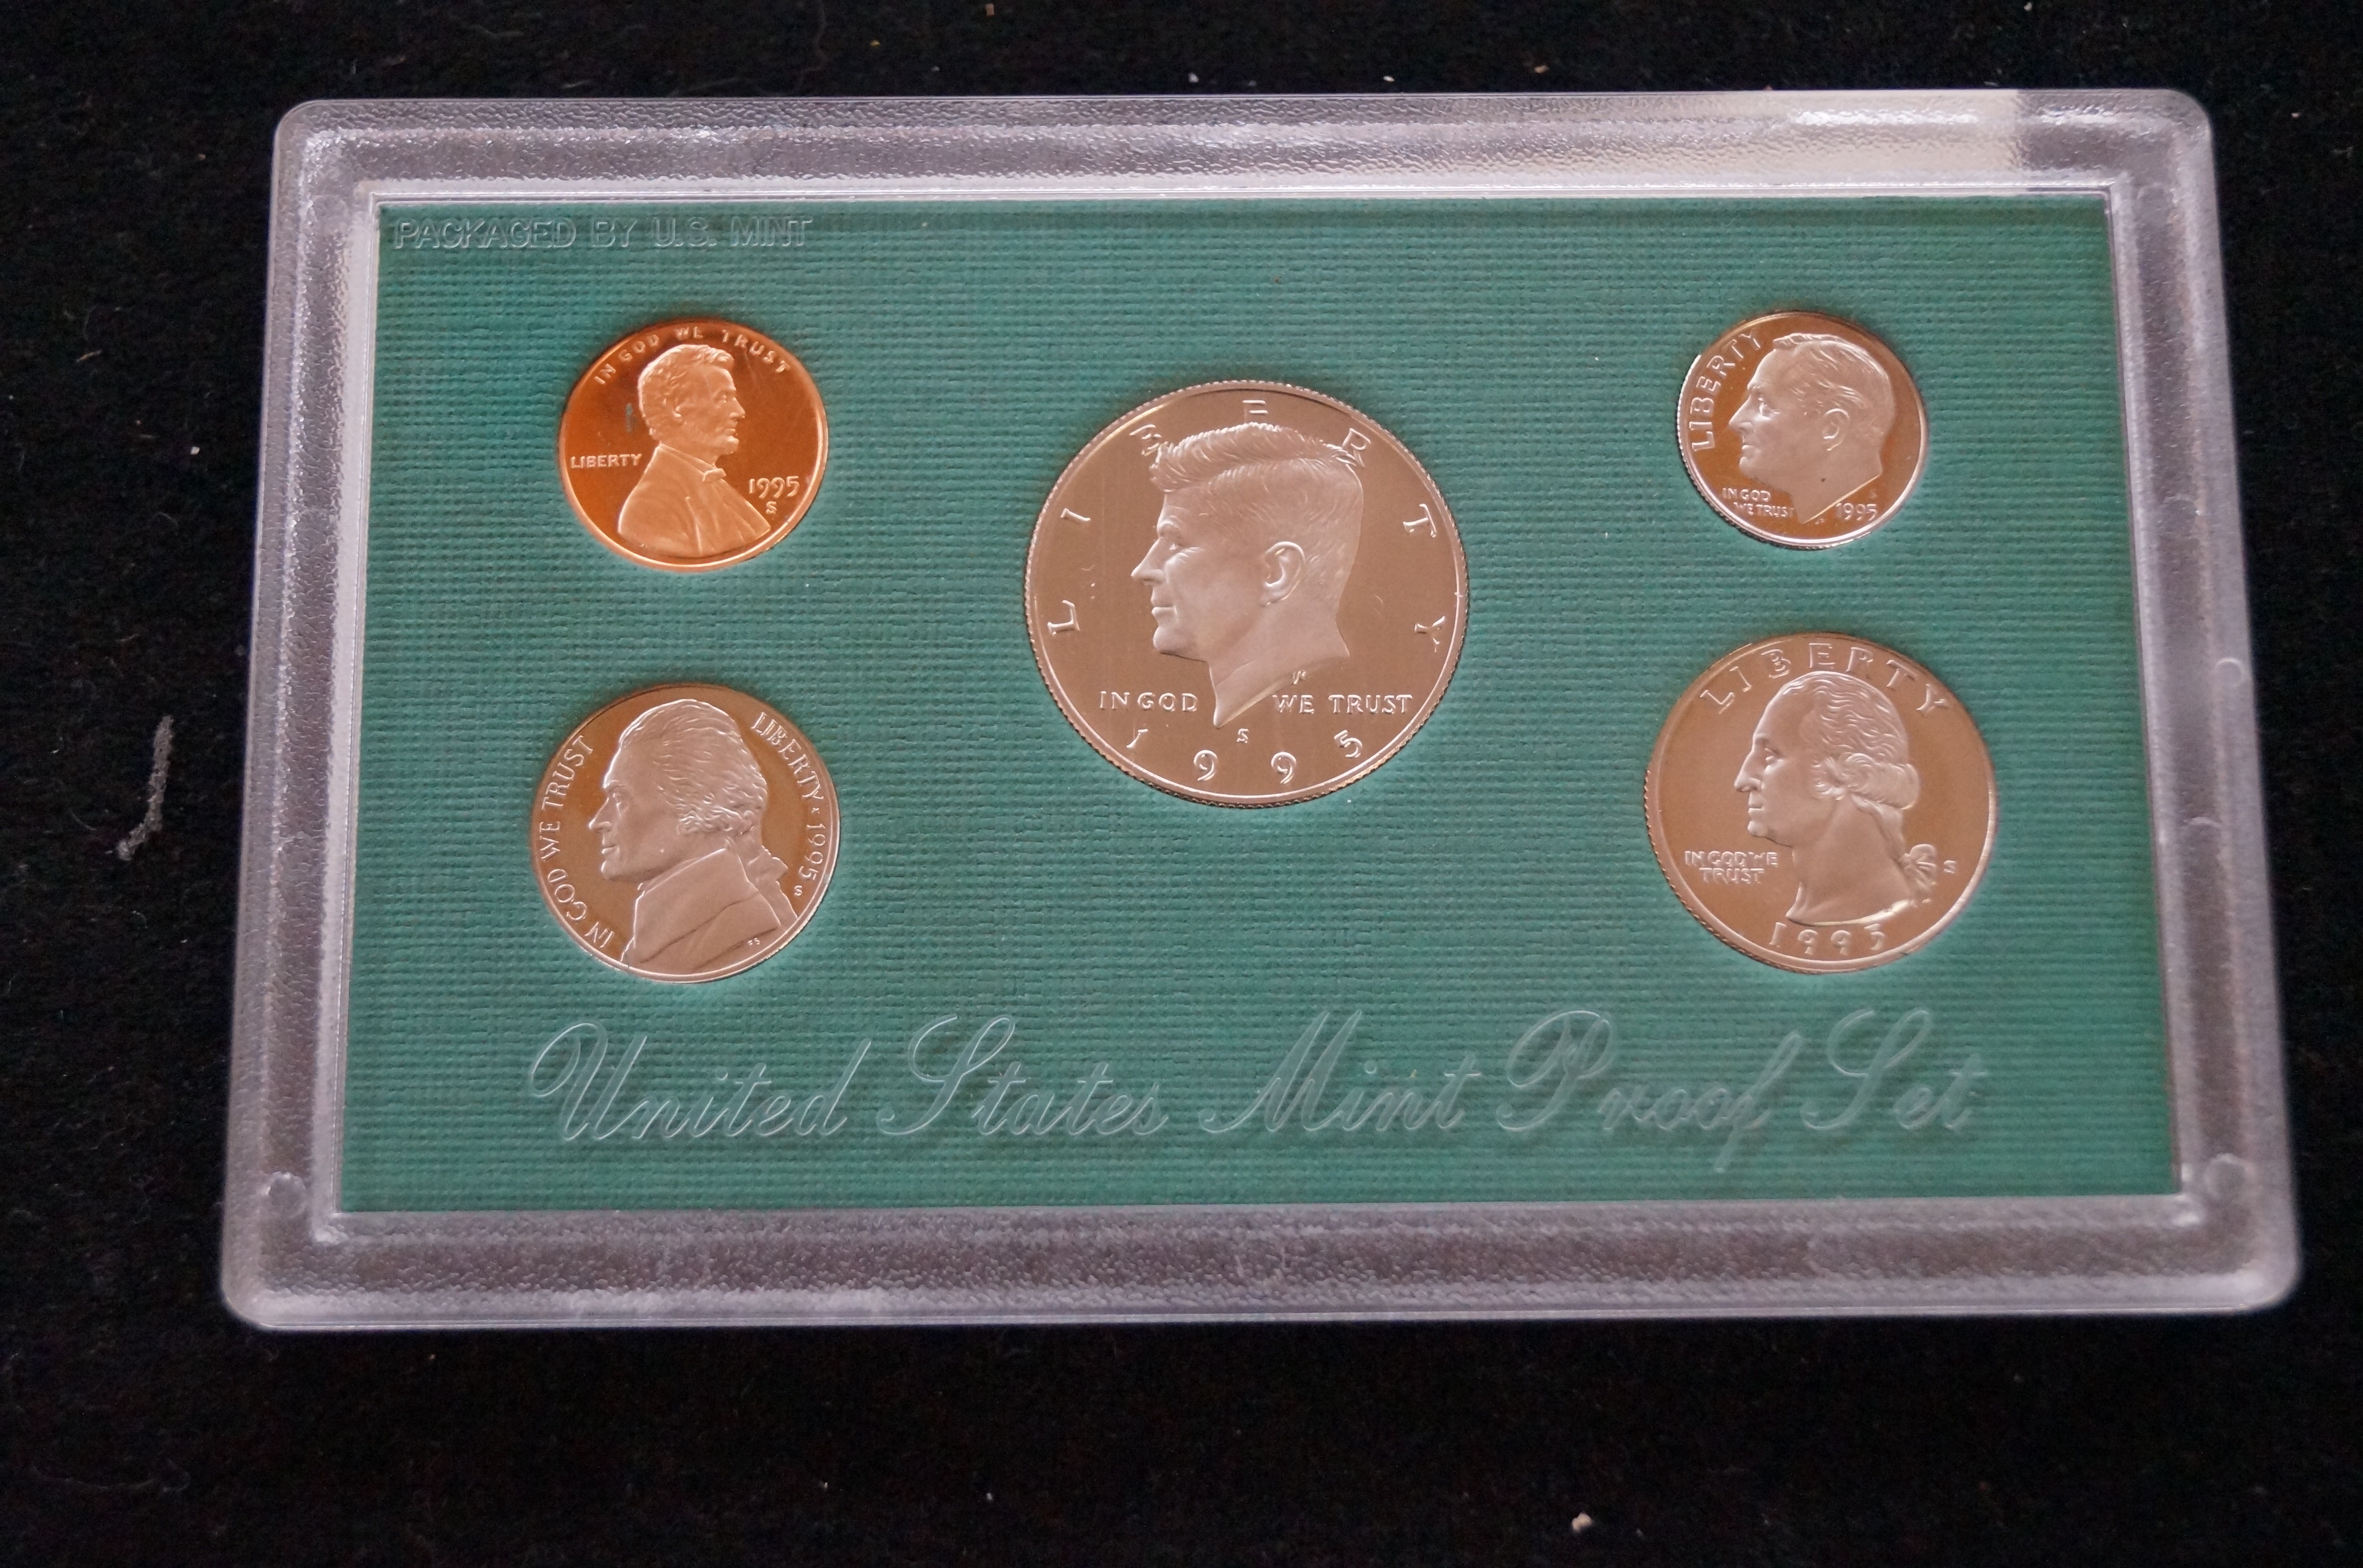 United States mint proof coin set 1995